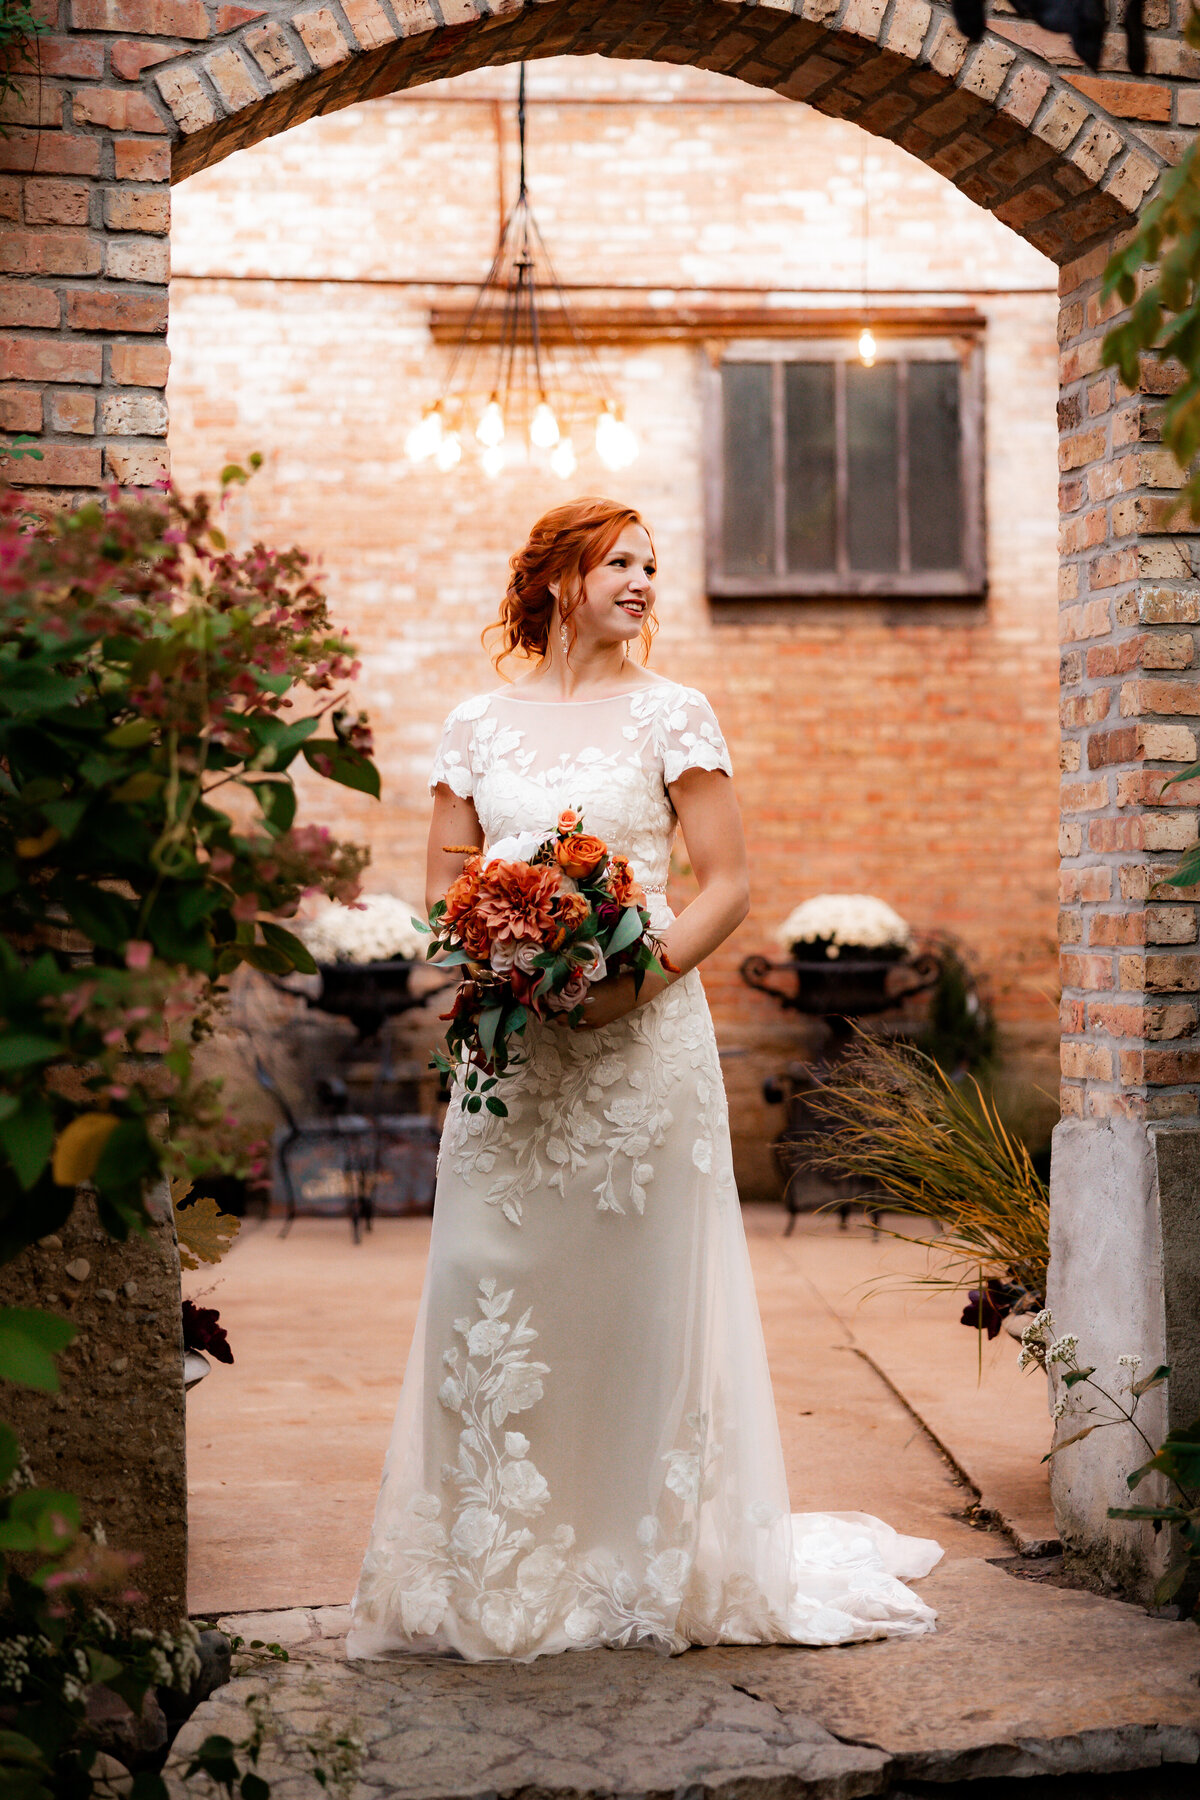 A portrait of a red head bride.